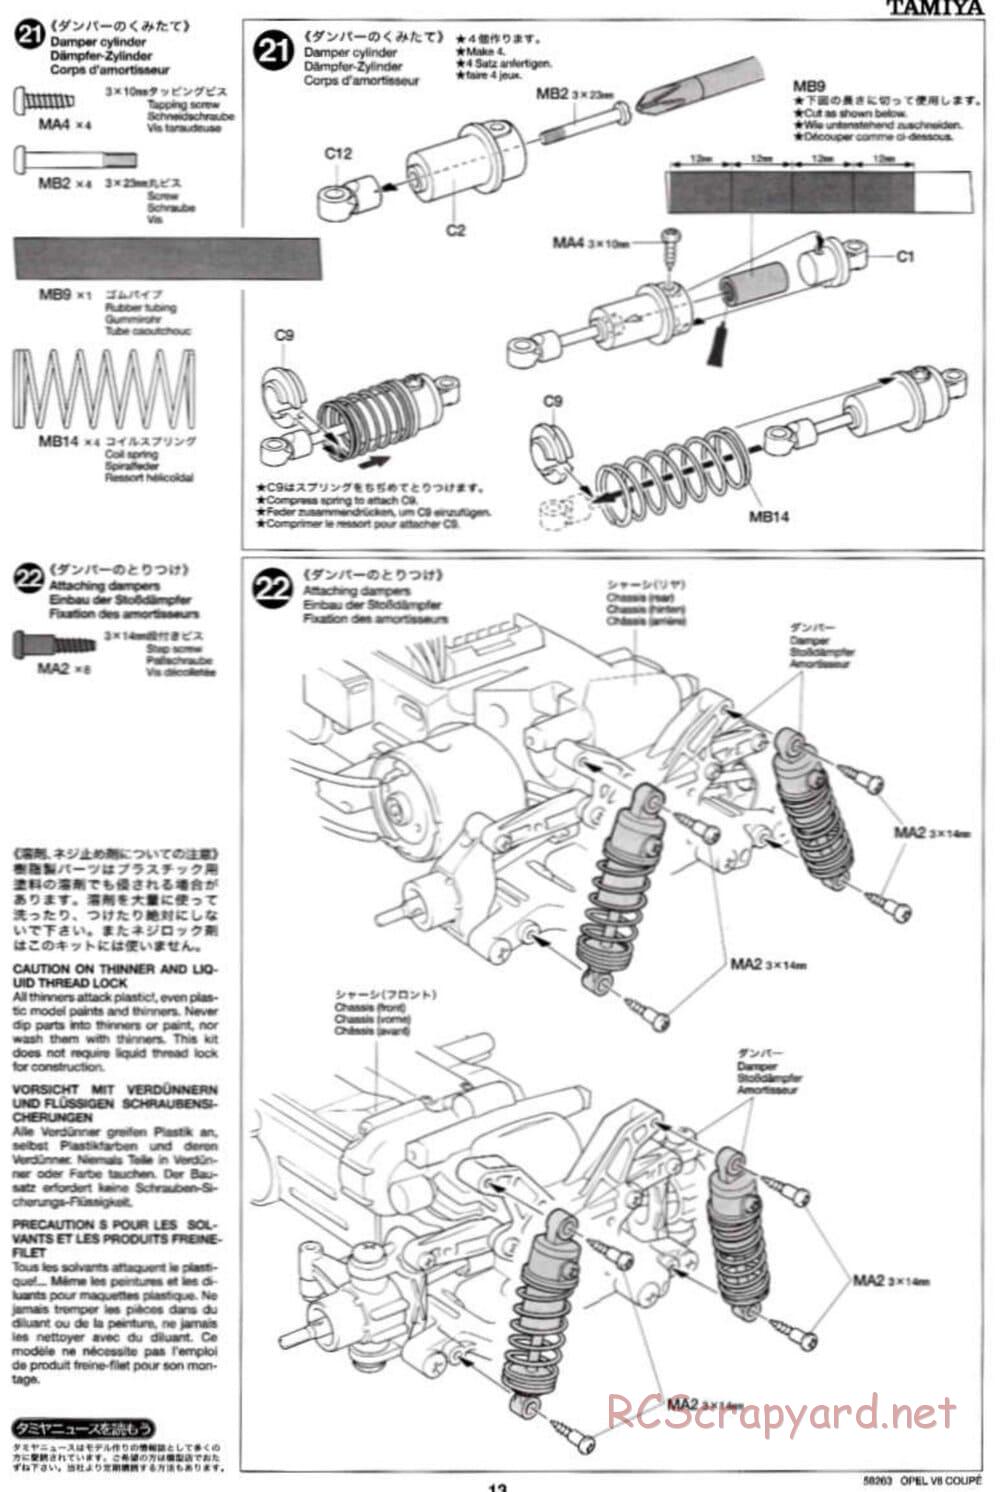 Tamiya - Opel V8 Coupe - TL-01 Chassis - Manual - Page 13